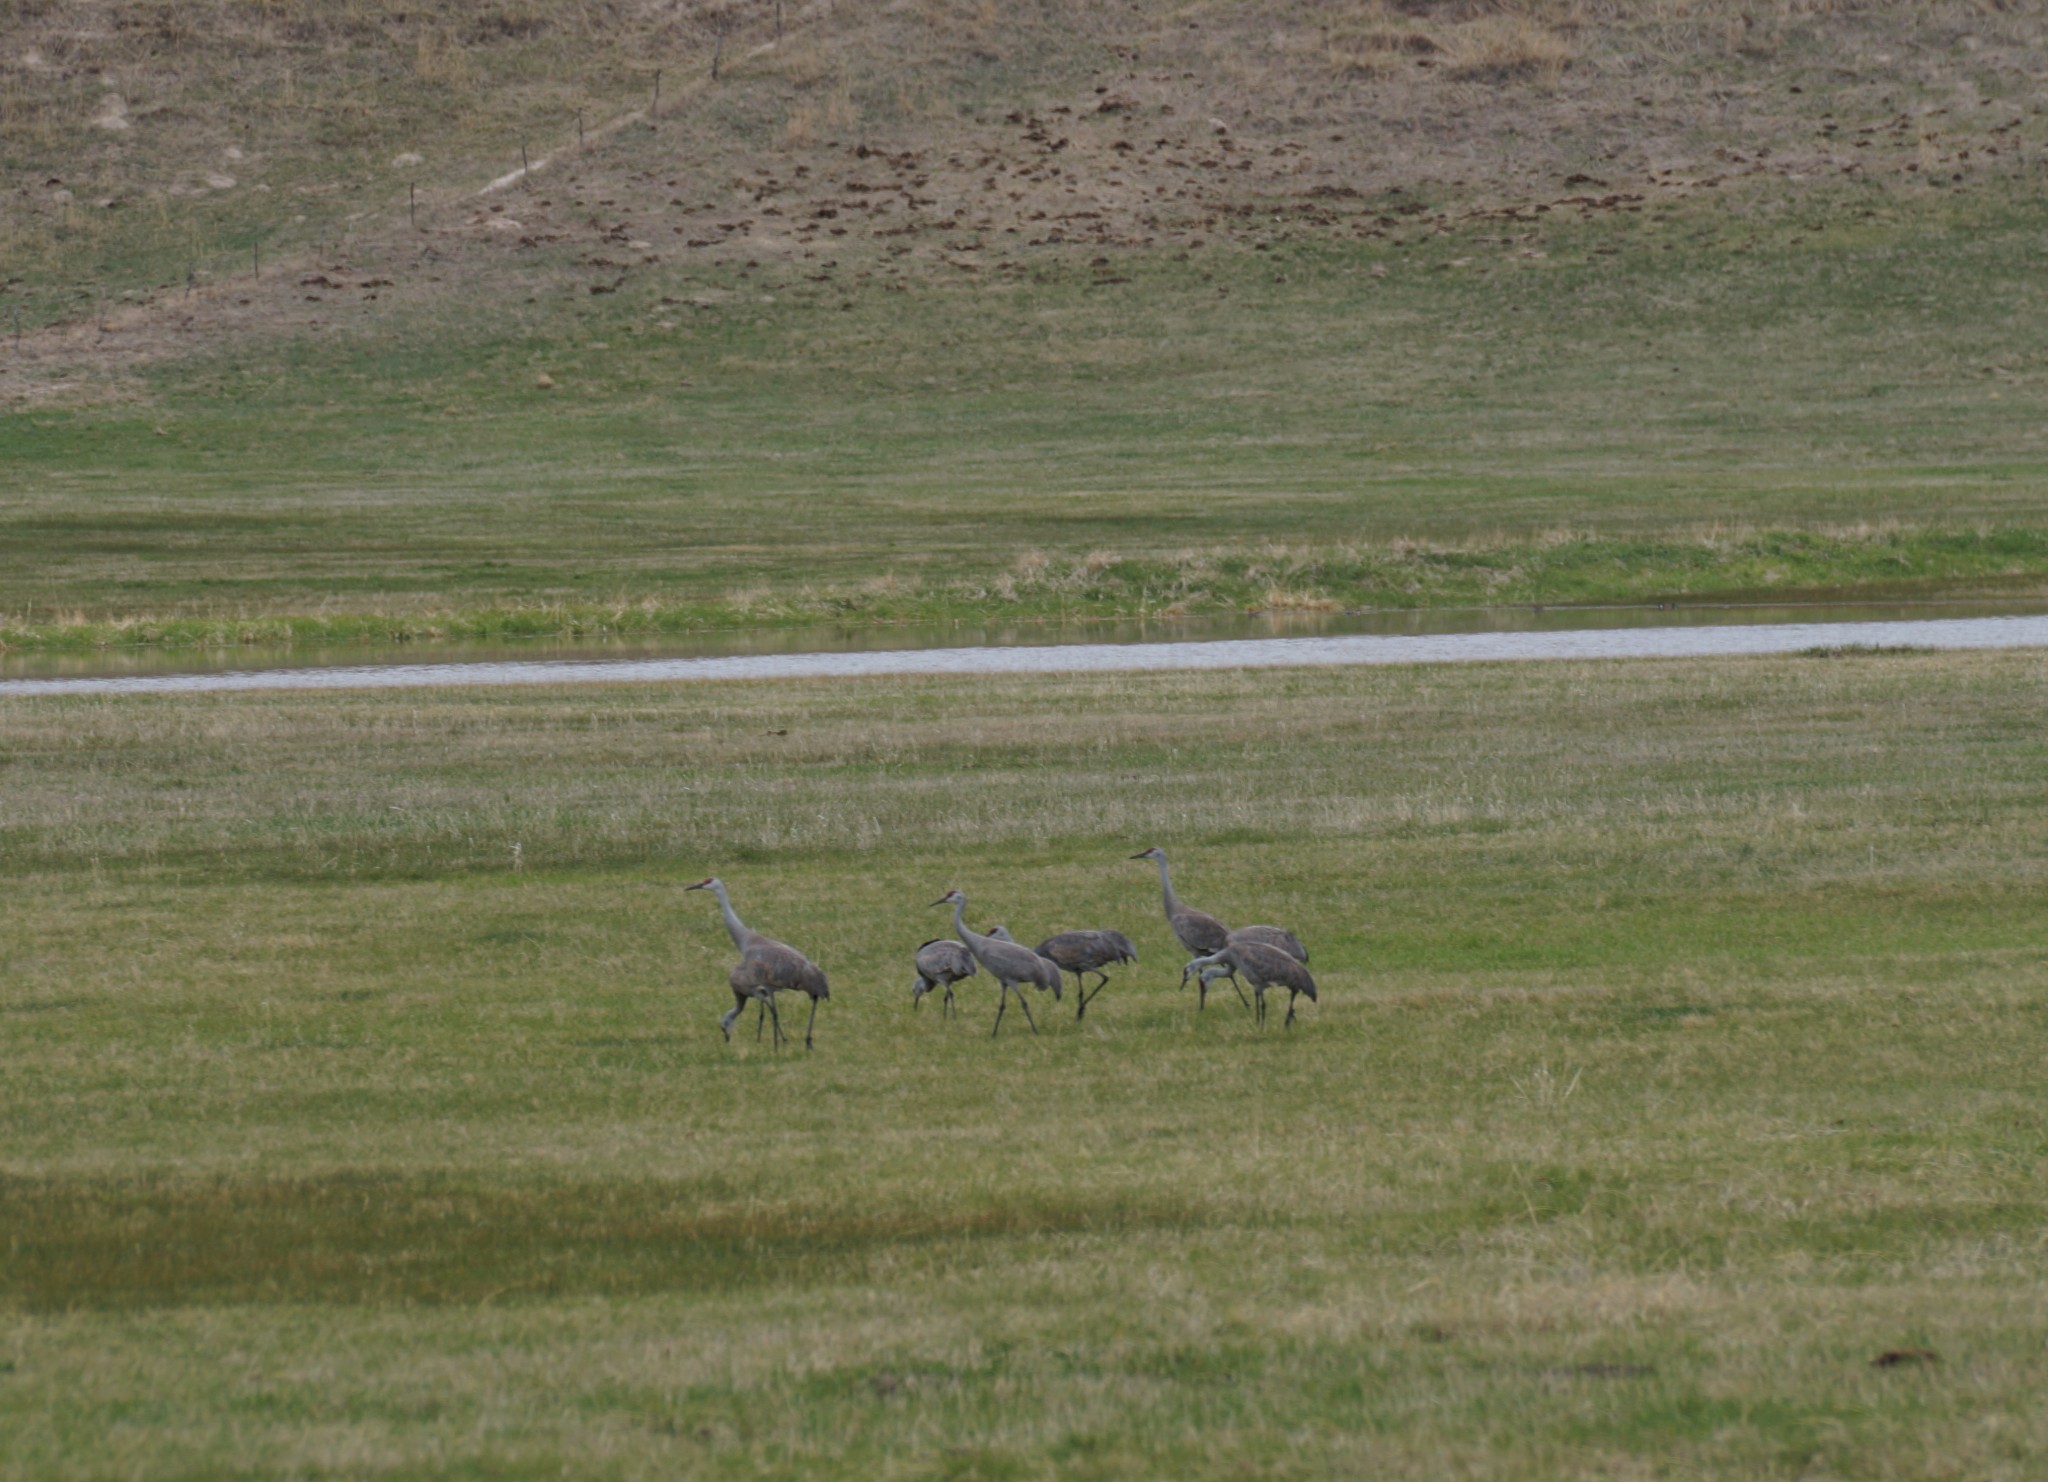 These lingering Sandhill Cranes were found in Grant County.